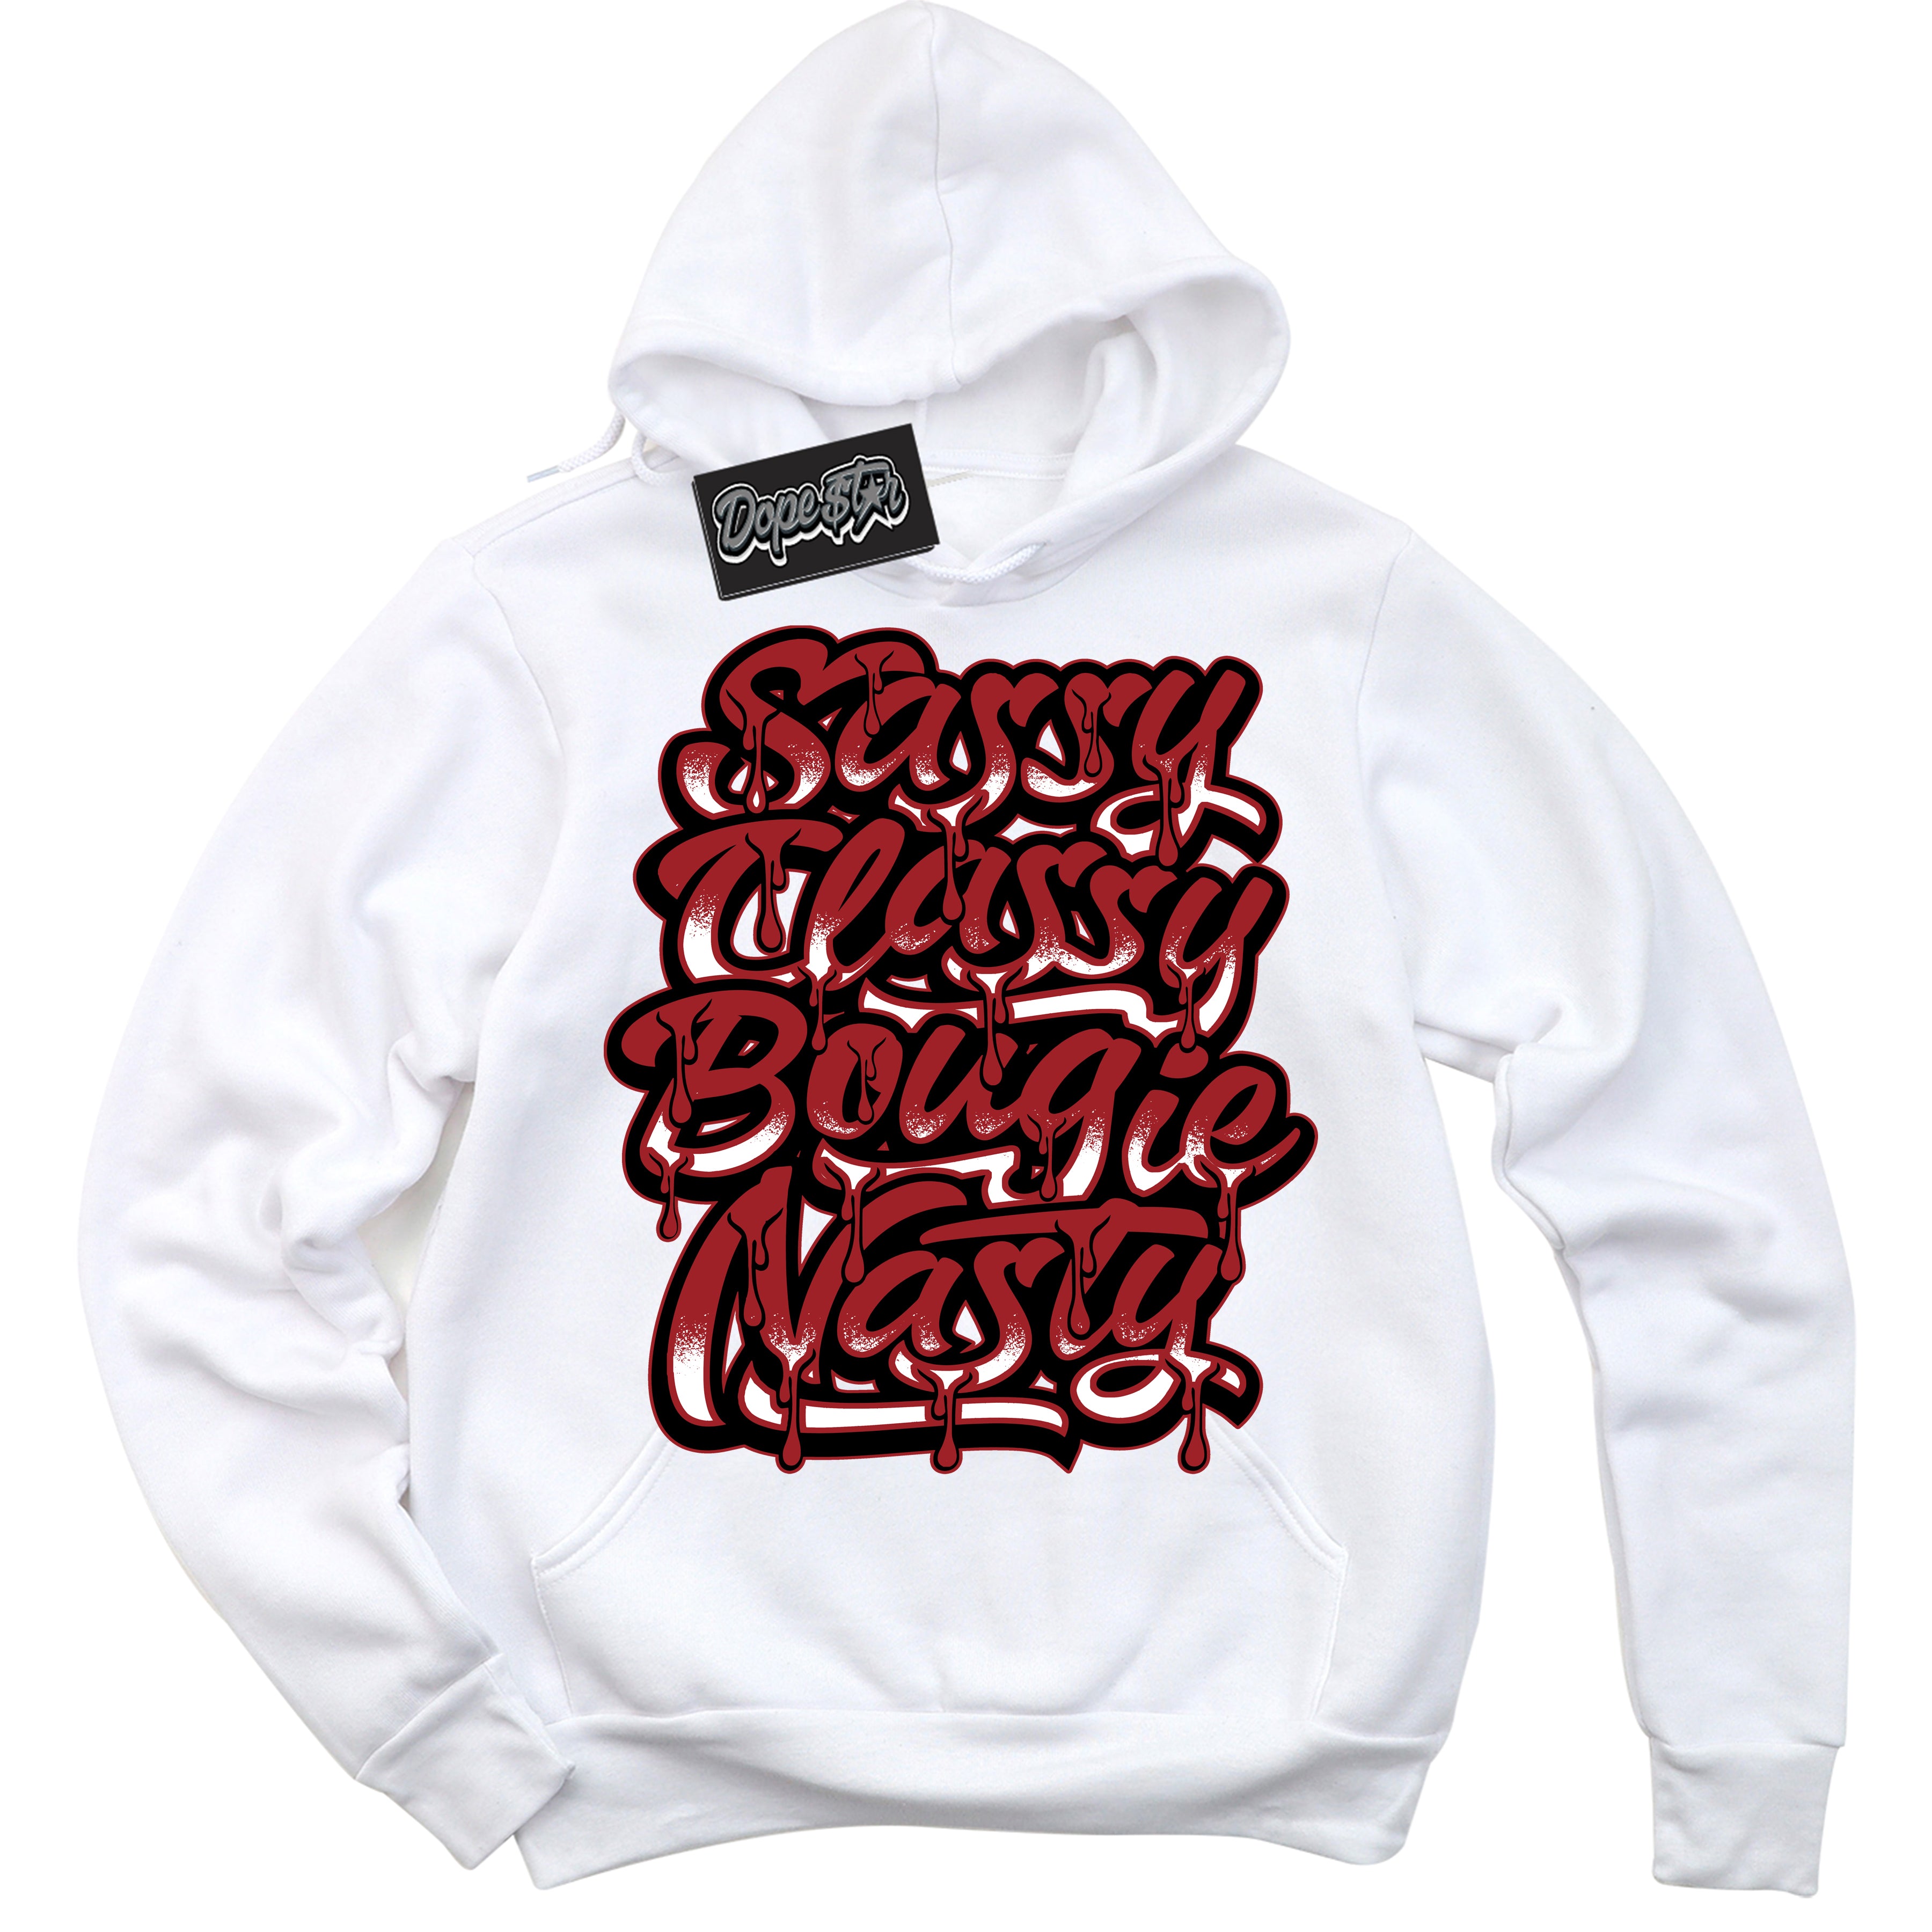 Cool White Hoodie With “ Sassy Classy “  Design That Perfectly Matches Lost And Found 1s Sneakers.